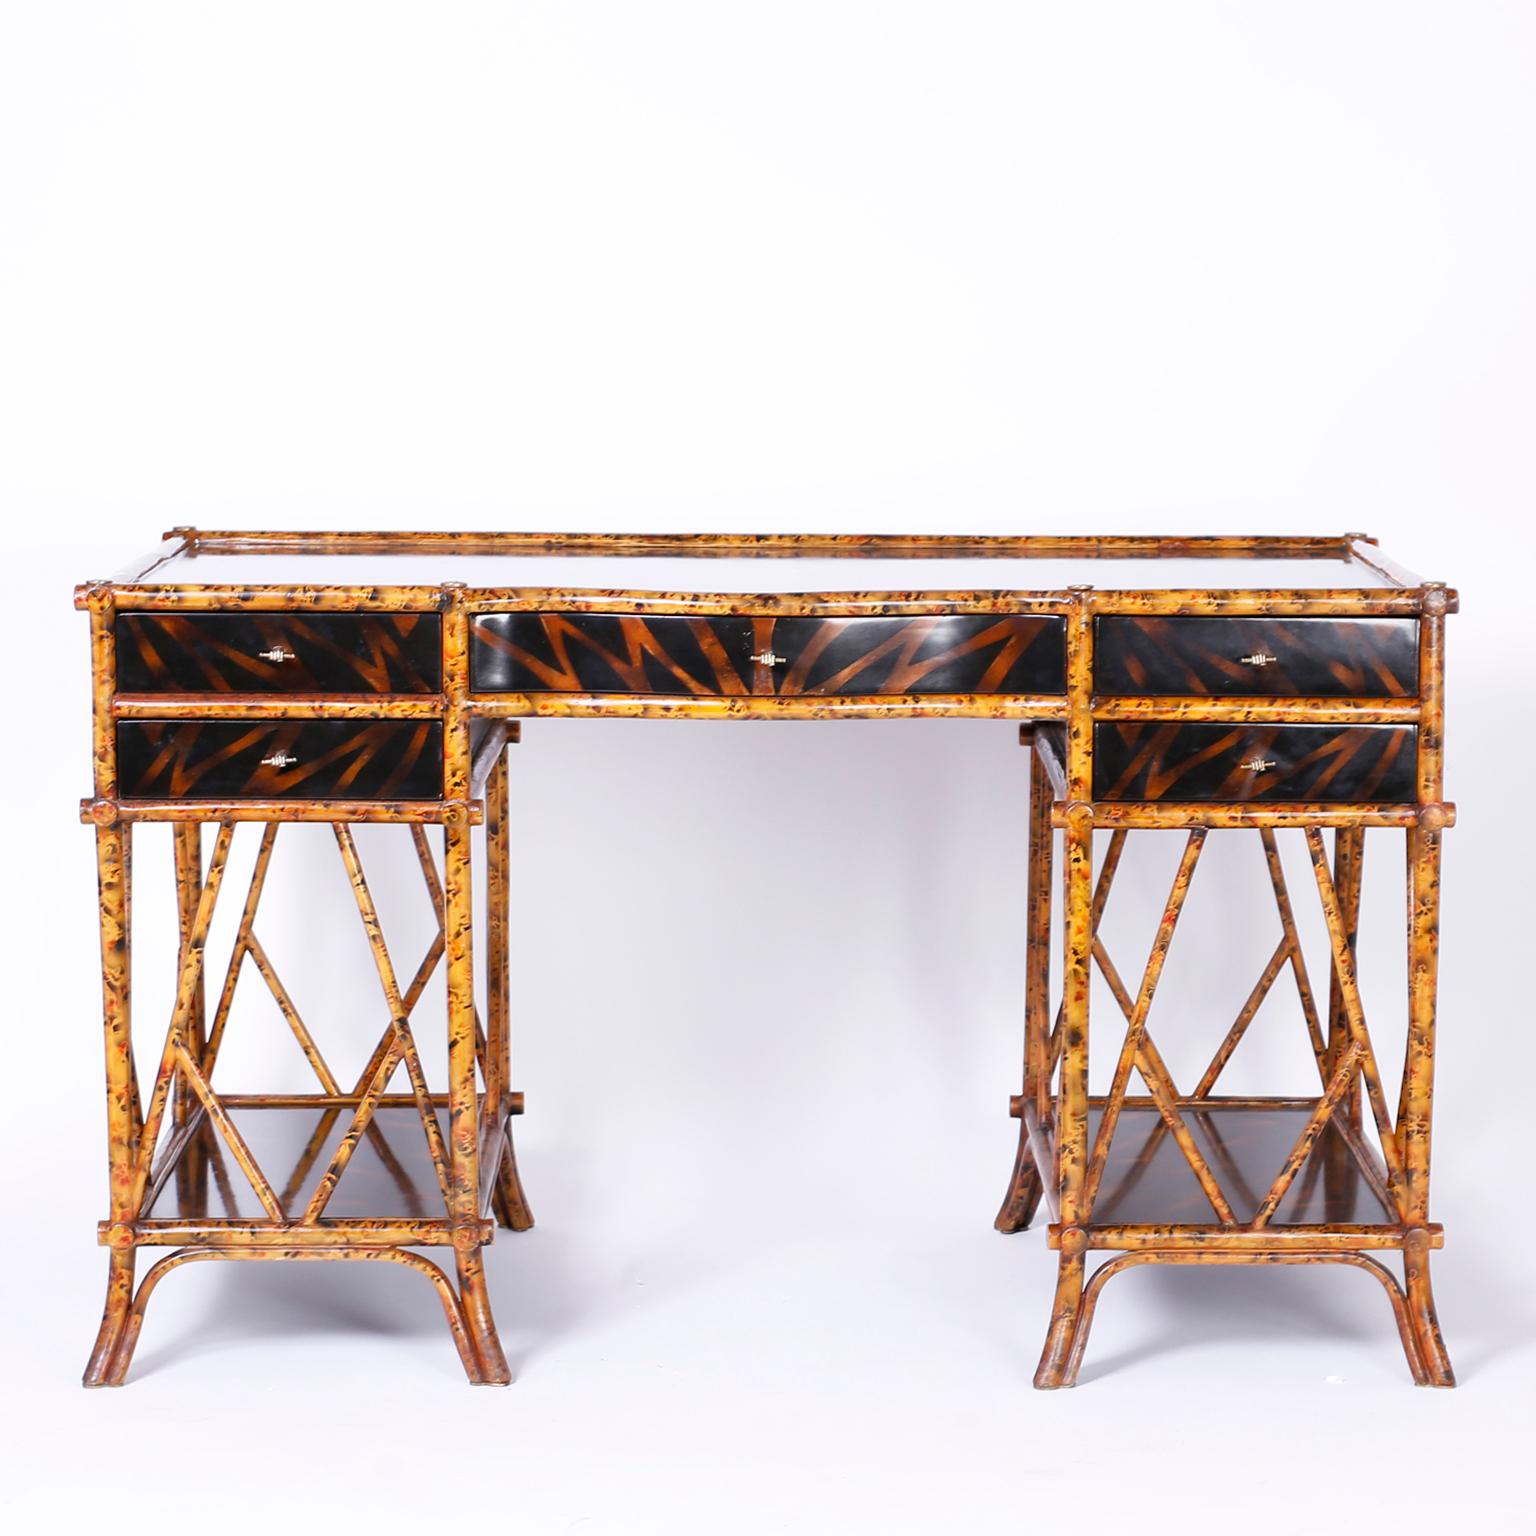 Five-drawer desk with a faux bamboo frame with a faux tortoise finish and featuring faux jungle lacquered panels, brass fist hardware, criss cross supports and splayed feet. Signed Maitland -Smith in a drawer.